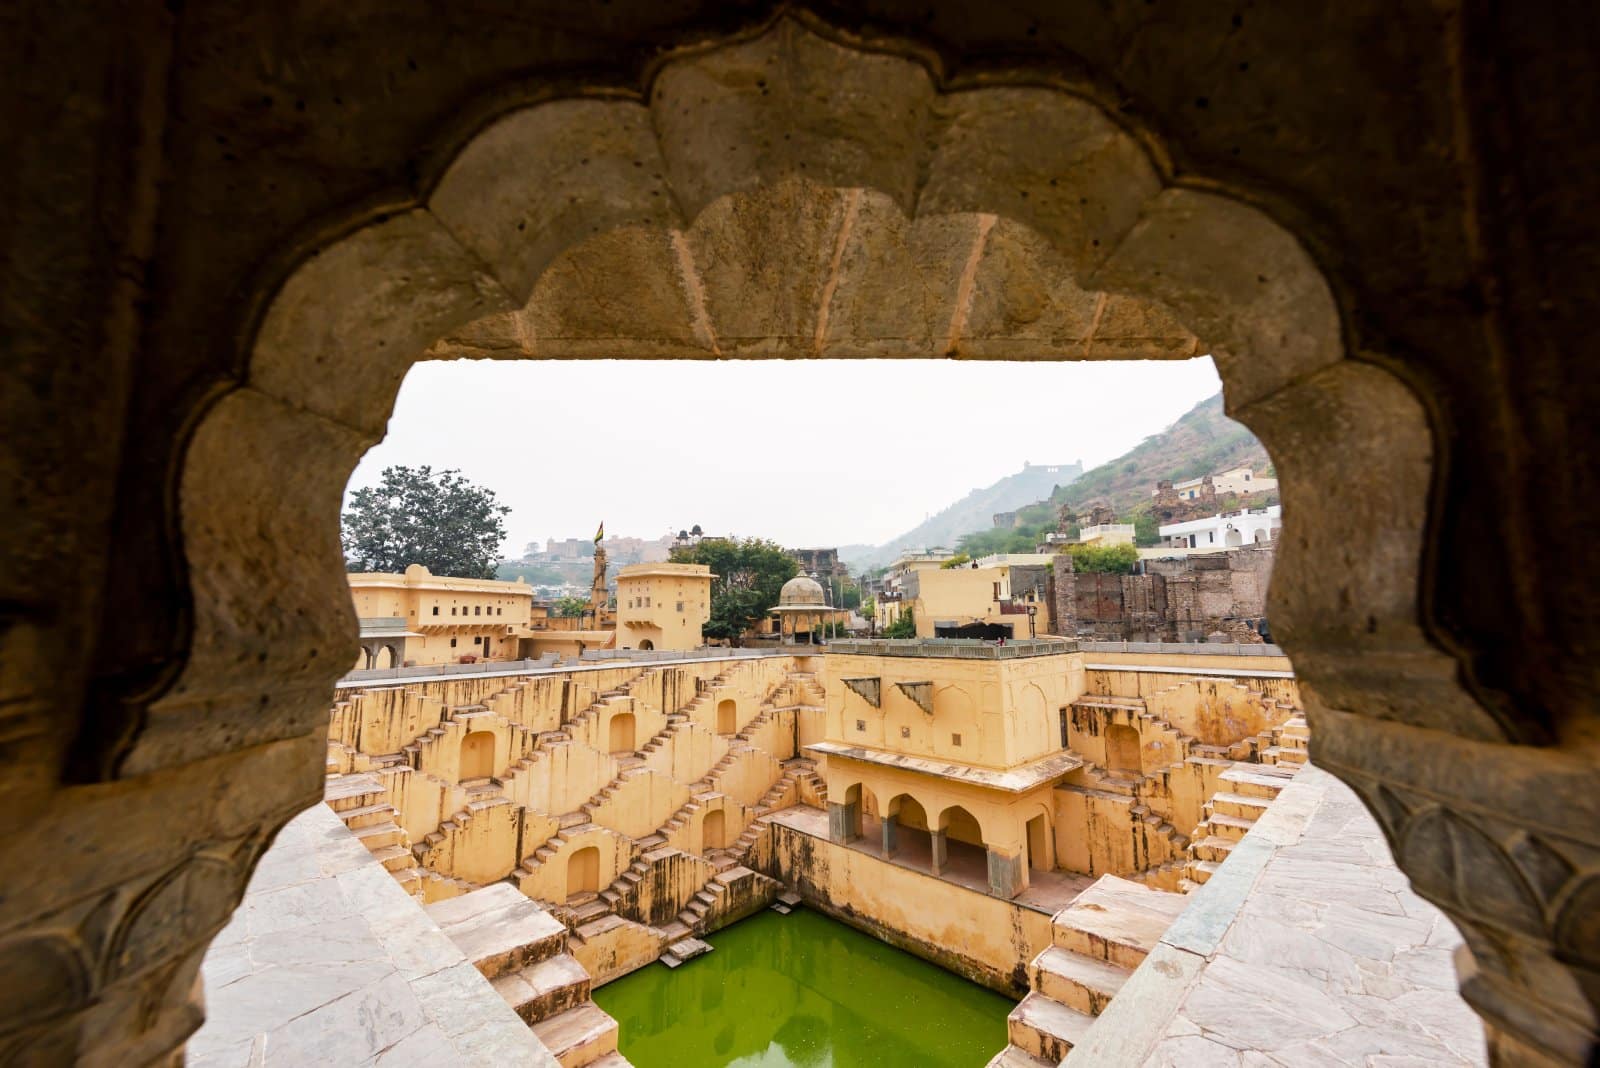 <p class="wp-caption-text">Image Credit: Shutterstock / PhilipYb Studio</p>  <p><span>The stepwells of Rajasthan, known as ‘baoris,’ are ancient water storage systems that are architectural marvels in their own right. Near Jaipur, the Chand Baori in Abhaneri is one of the world’s largest and most beautiful stepwells, dating back to the 9th century. This stepwell features 3,500 narrow steps descending 20 meters to the water’s surface, arranged in perfect symmetry.</span></p>